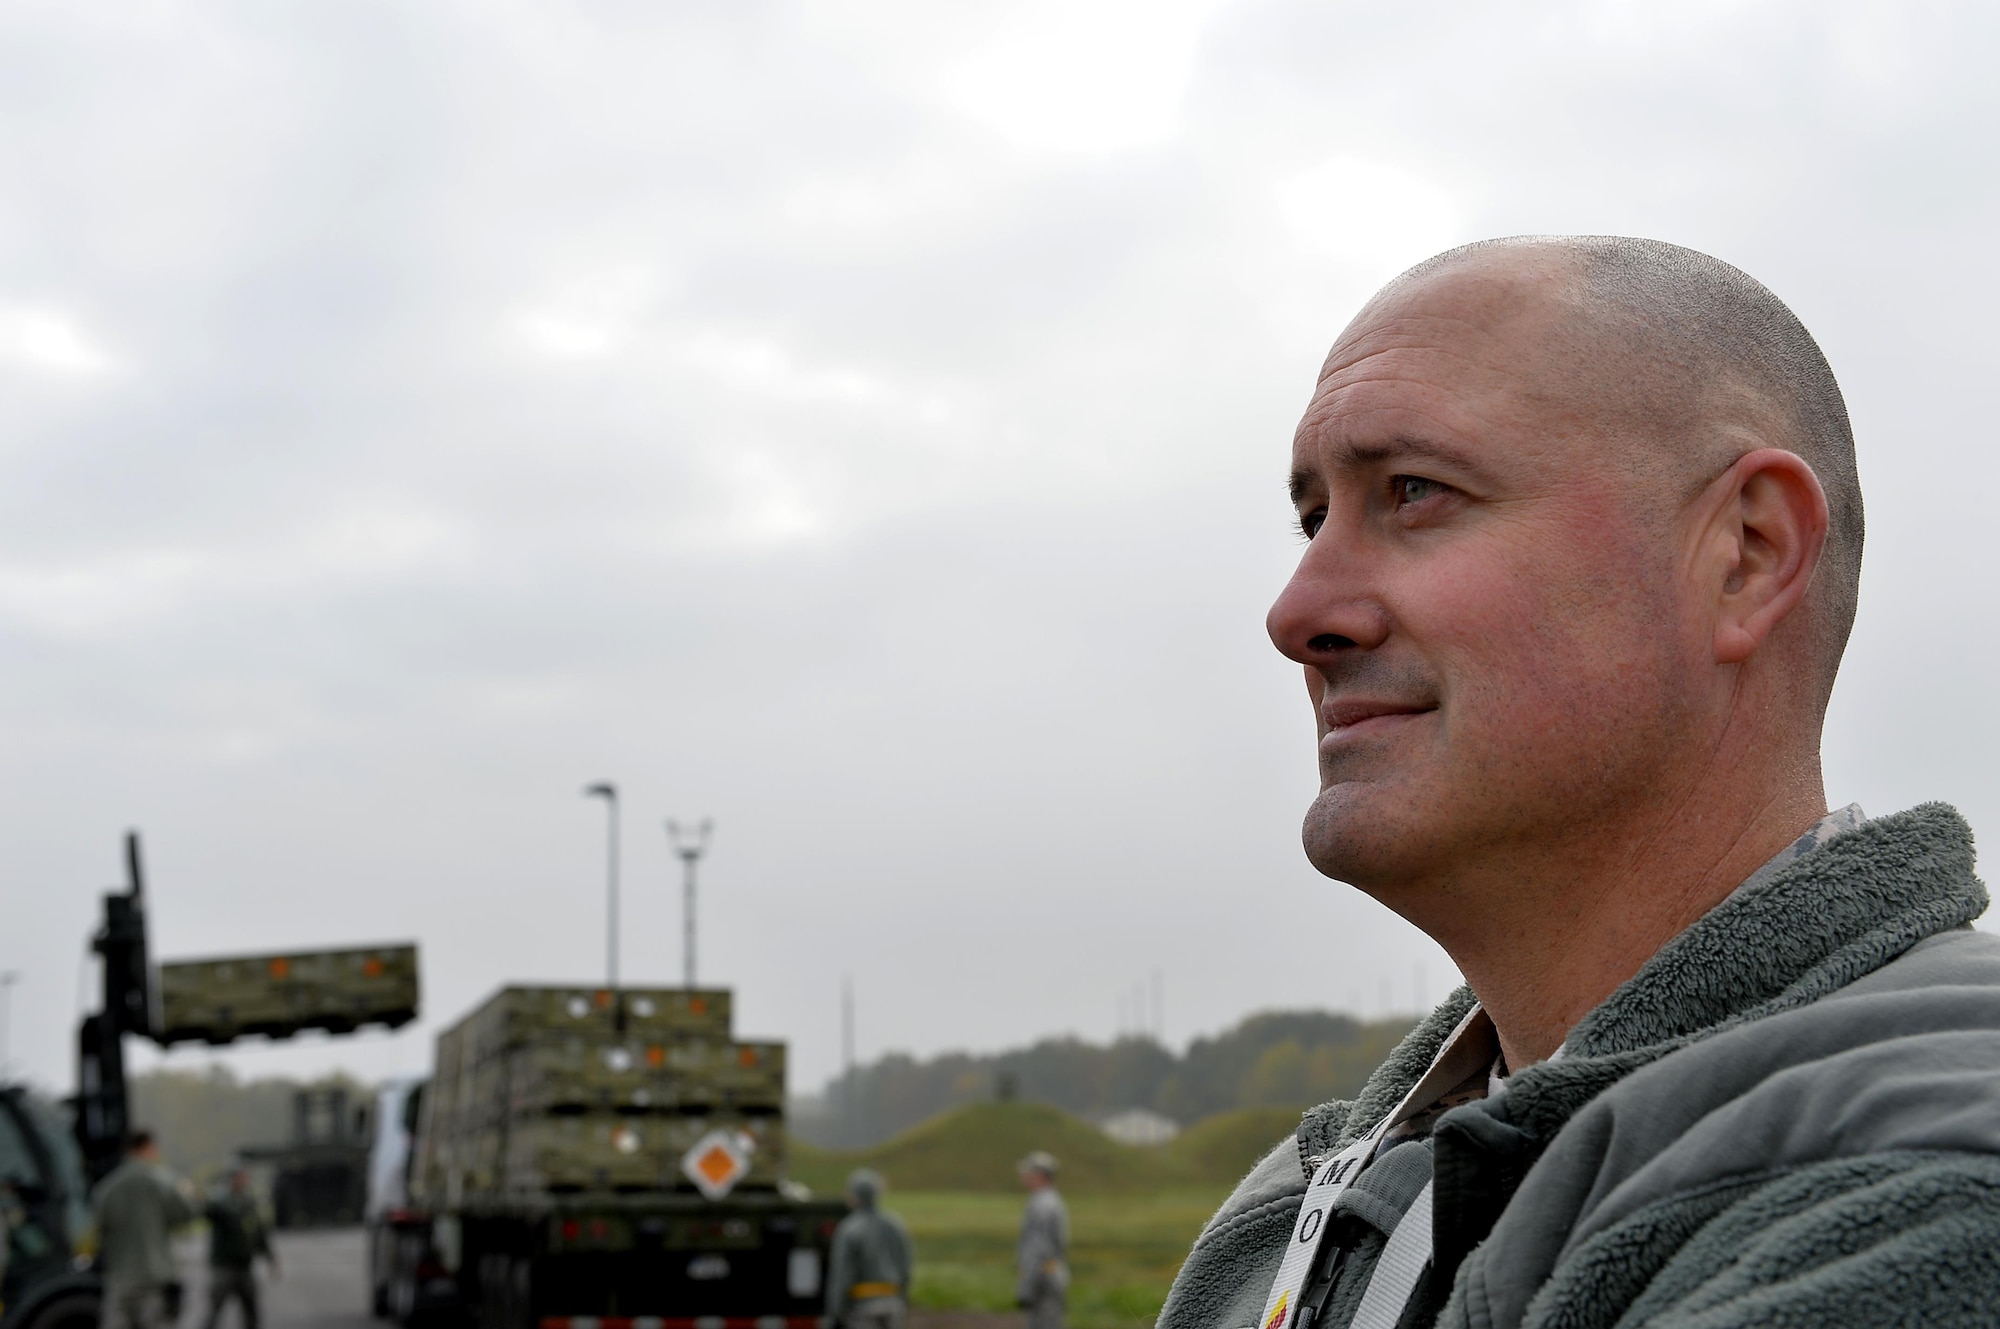 Master Sgt. James Tschoepe, 86th Munitions Squadron NCO in charge of tactical aircrew rapid response packages, watches his Airmen perform scenarios during a local exercise at Ramstein Air Base, Germany, Oct. 26, 2016. The 86th MUNS is the hub for all munitions movements for United States Air Forces in Europe and Africa. (U.S. Air Force photo by Airman 1st Class Joshua Magbanua)